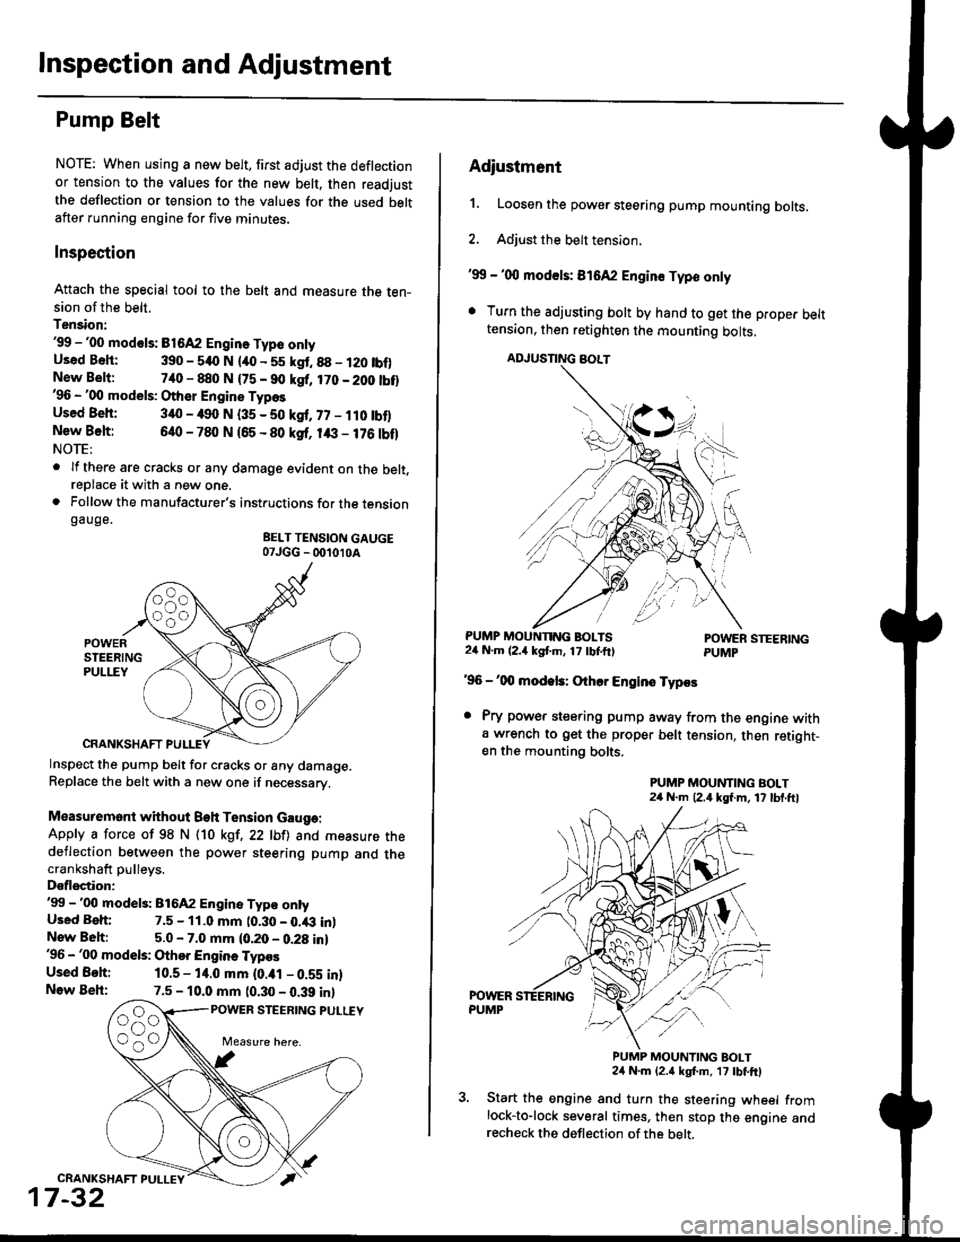 HONDA CIVIC 1997 6.G Owners Manual Inspection and Adjustment
Pump Belt
NOTE: When using a new belt, first adjust the deflection
or tension to the values for the new belt, then readjust
the deflection or tension to the values for the us